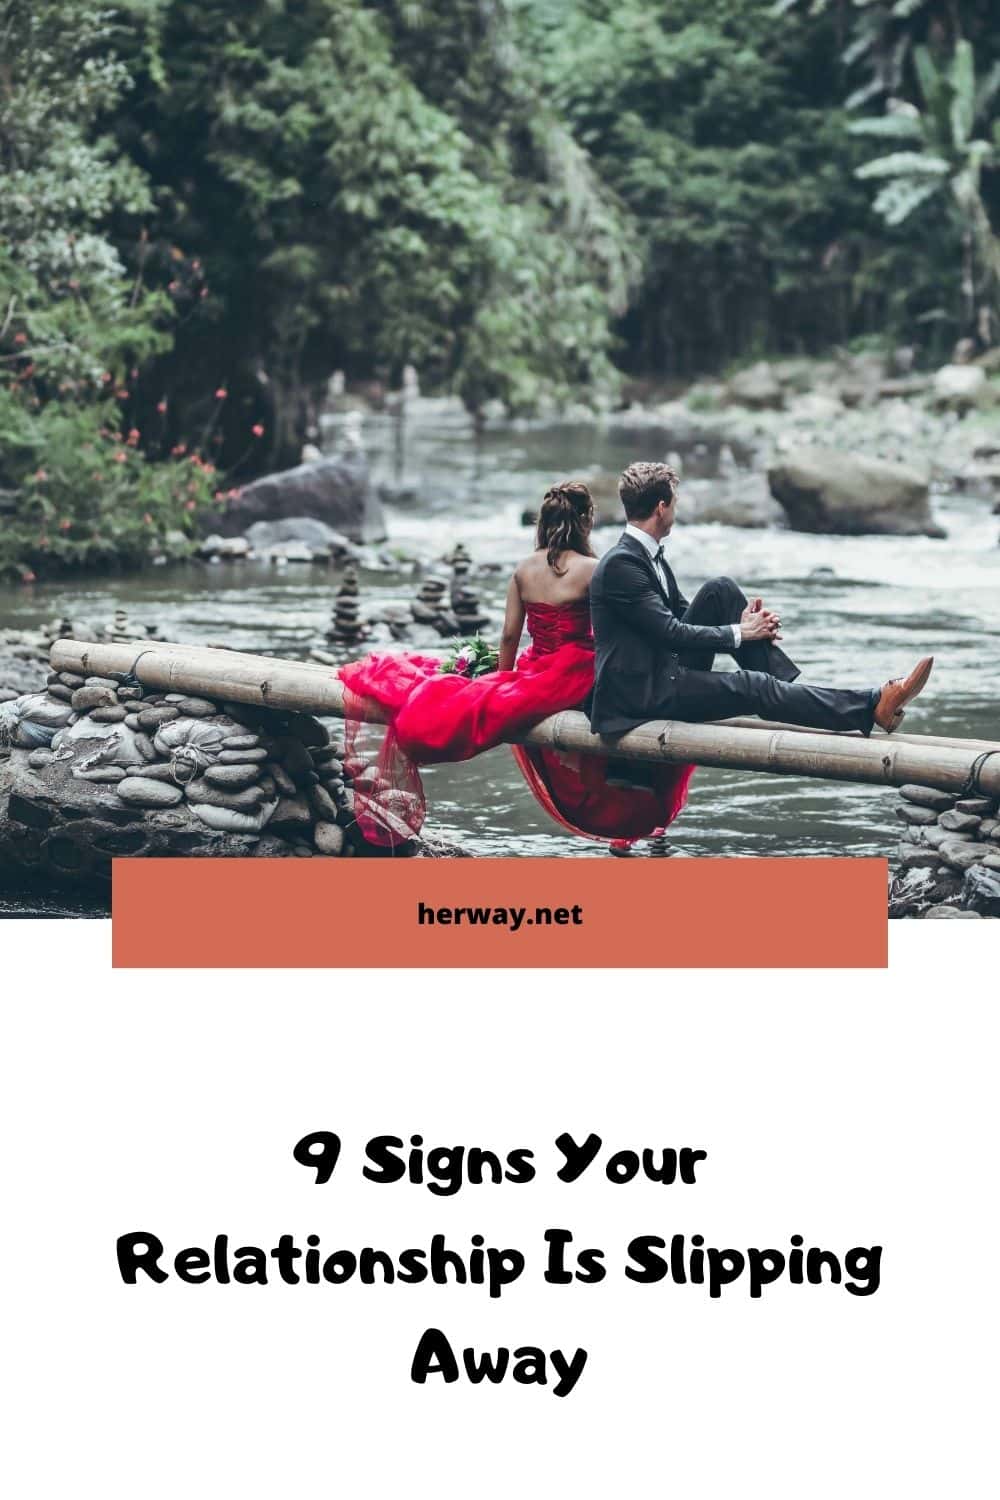 9 Signs Your Relationship Is Slipping Away